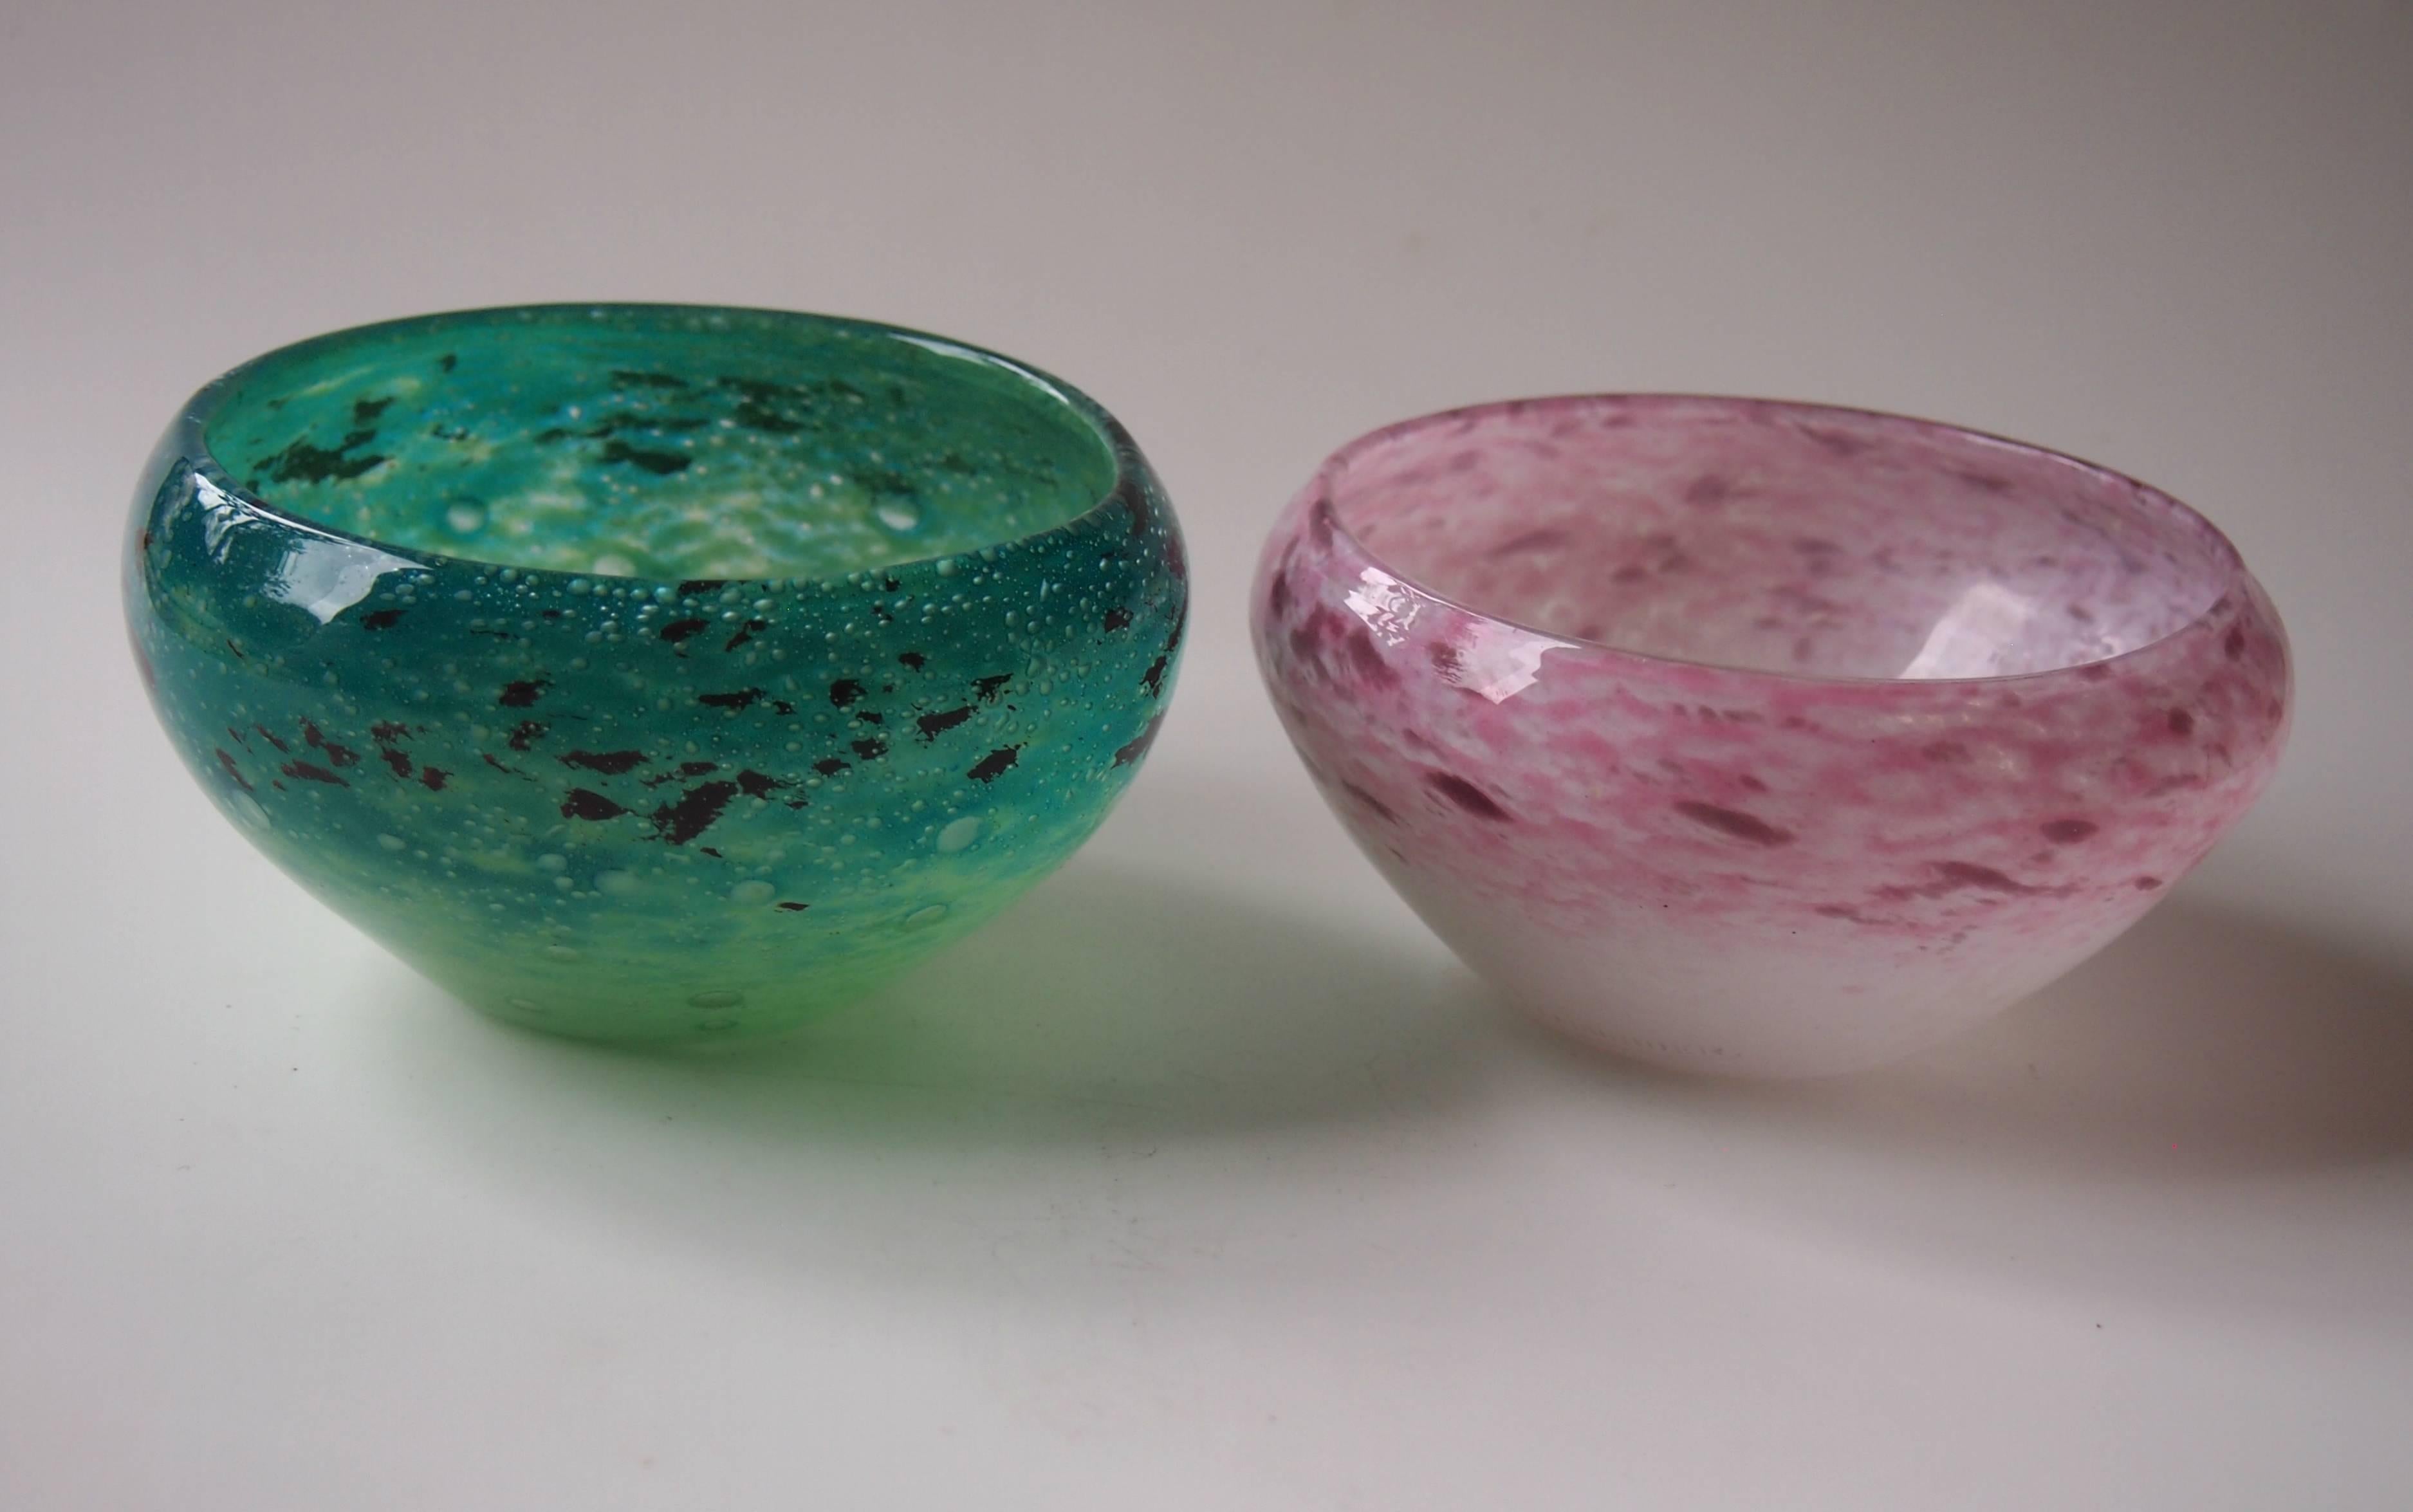 Rare pair of classic French 'Jade' glass bowls by Schneider; one in white, pinks and purples and one in greens and purple with controlled bubbles. Only the pink one appears to be signed (Picture 8). This glass technique (usually called 'Jade') was